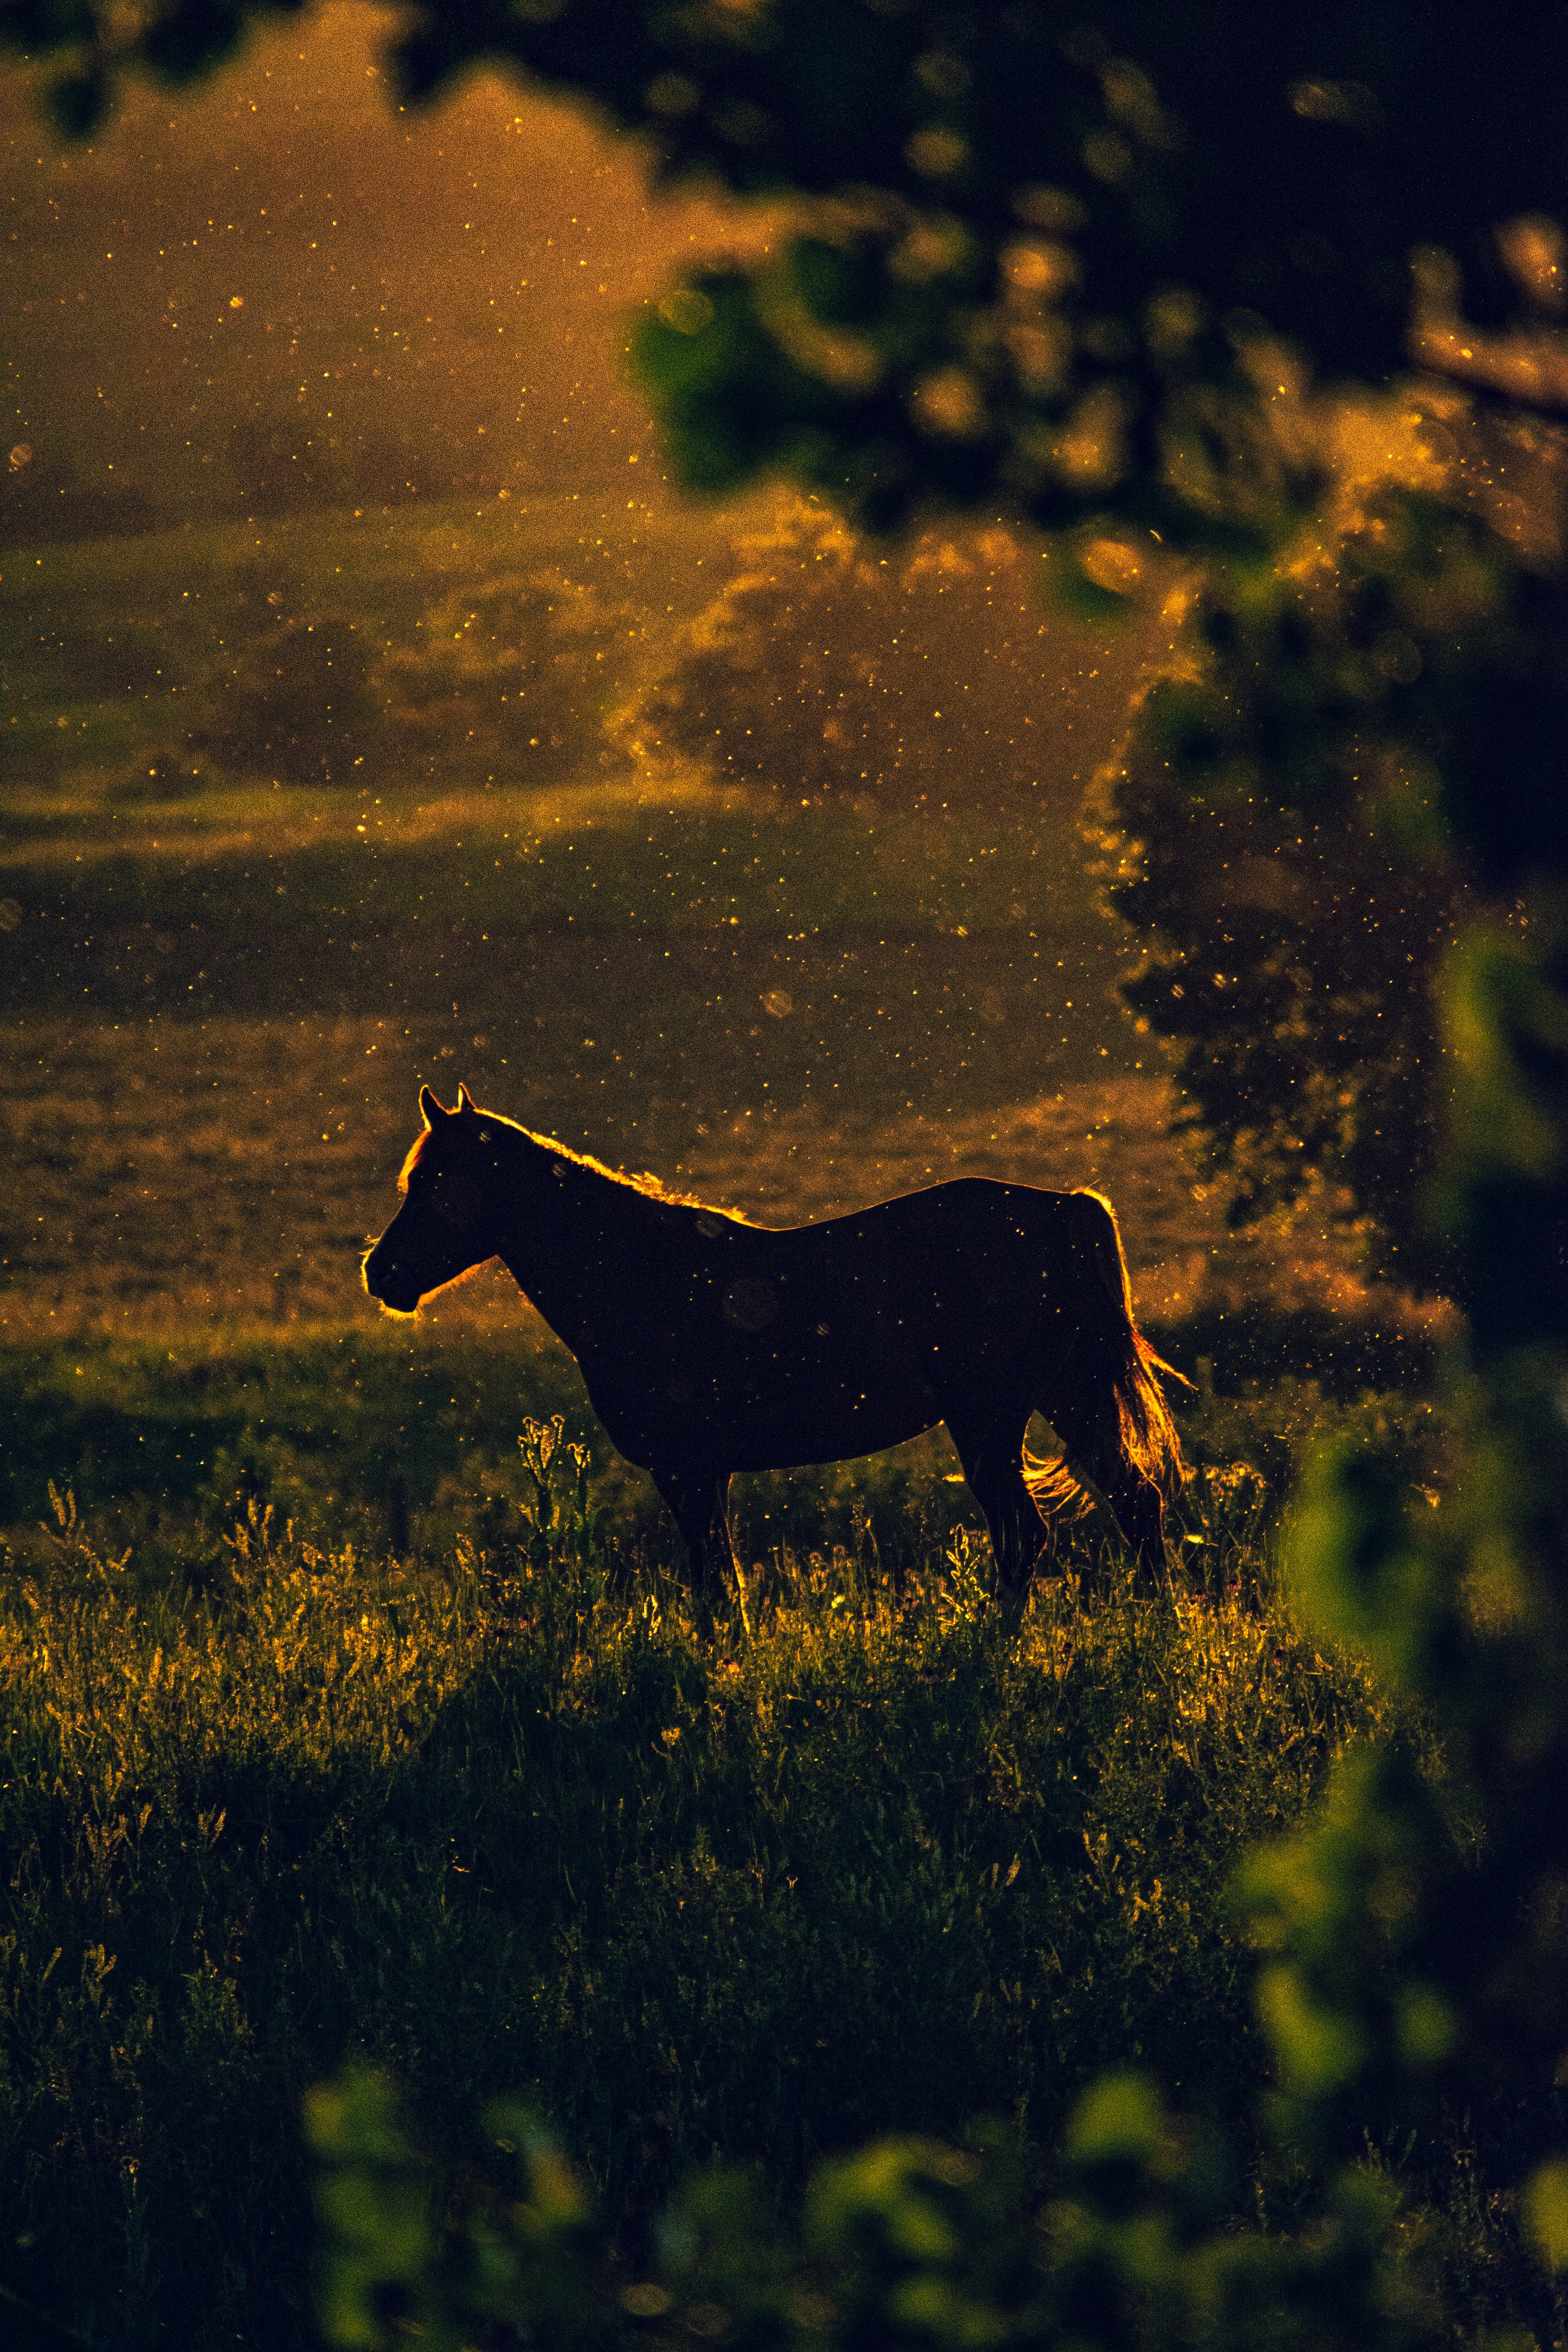 New Lock Screen Wallpapers sunset, nature, dark, silhouette, horse, meadow